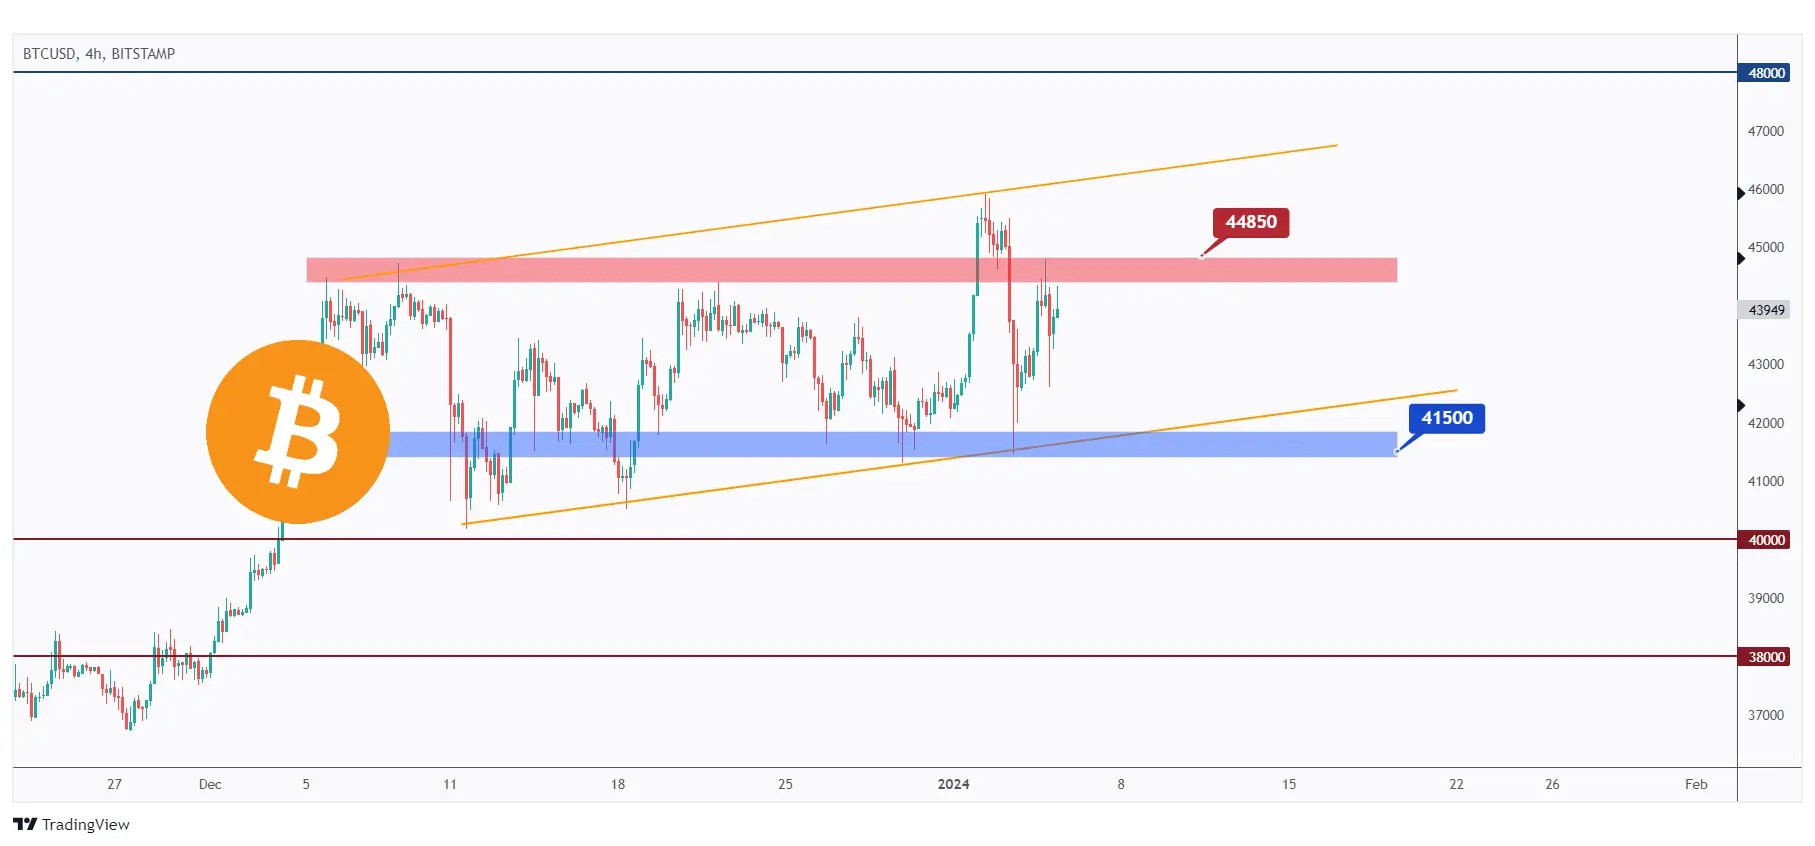 BTC 4H chart showing that it has been trading inside a range for a month and currently approaching a key level at $44,850.